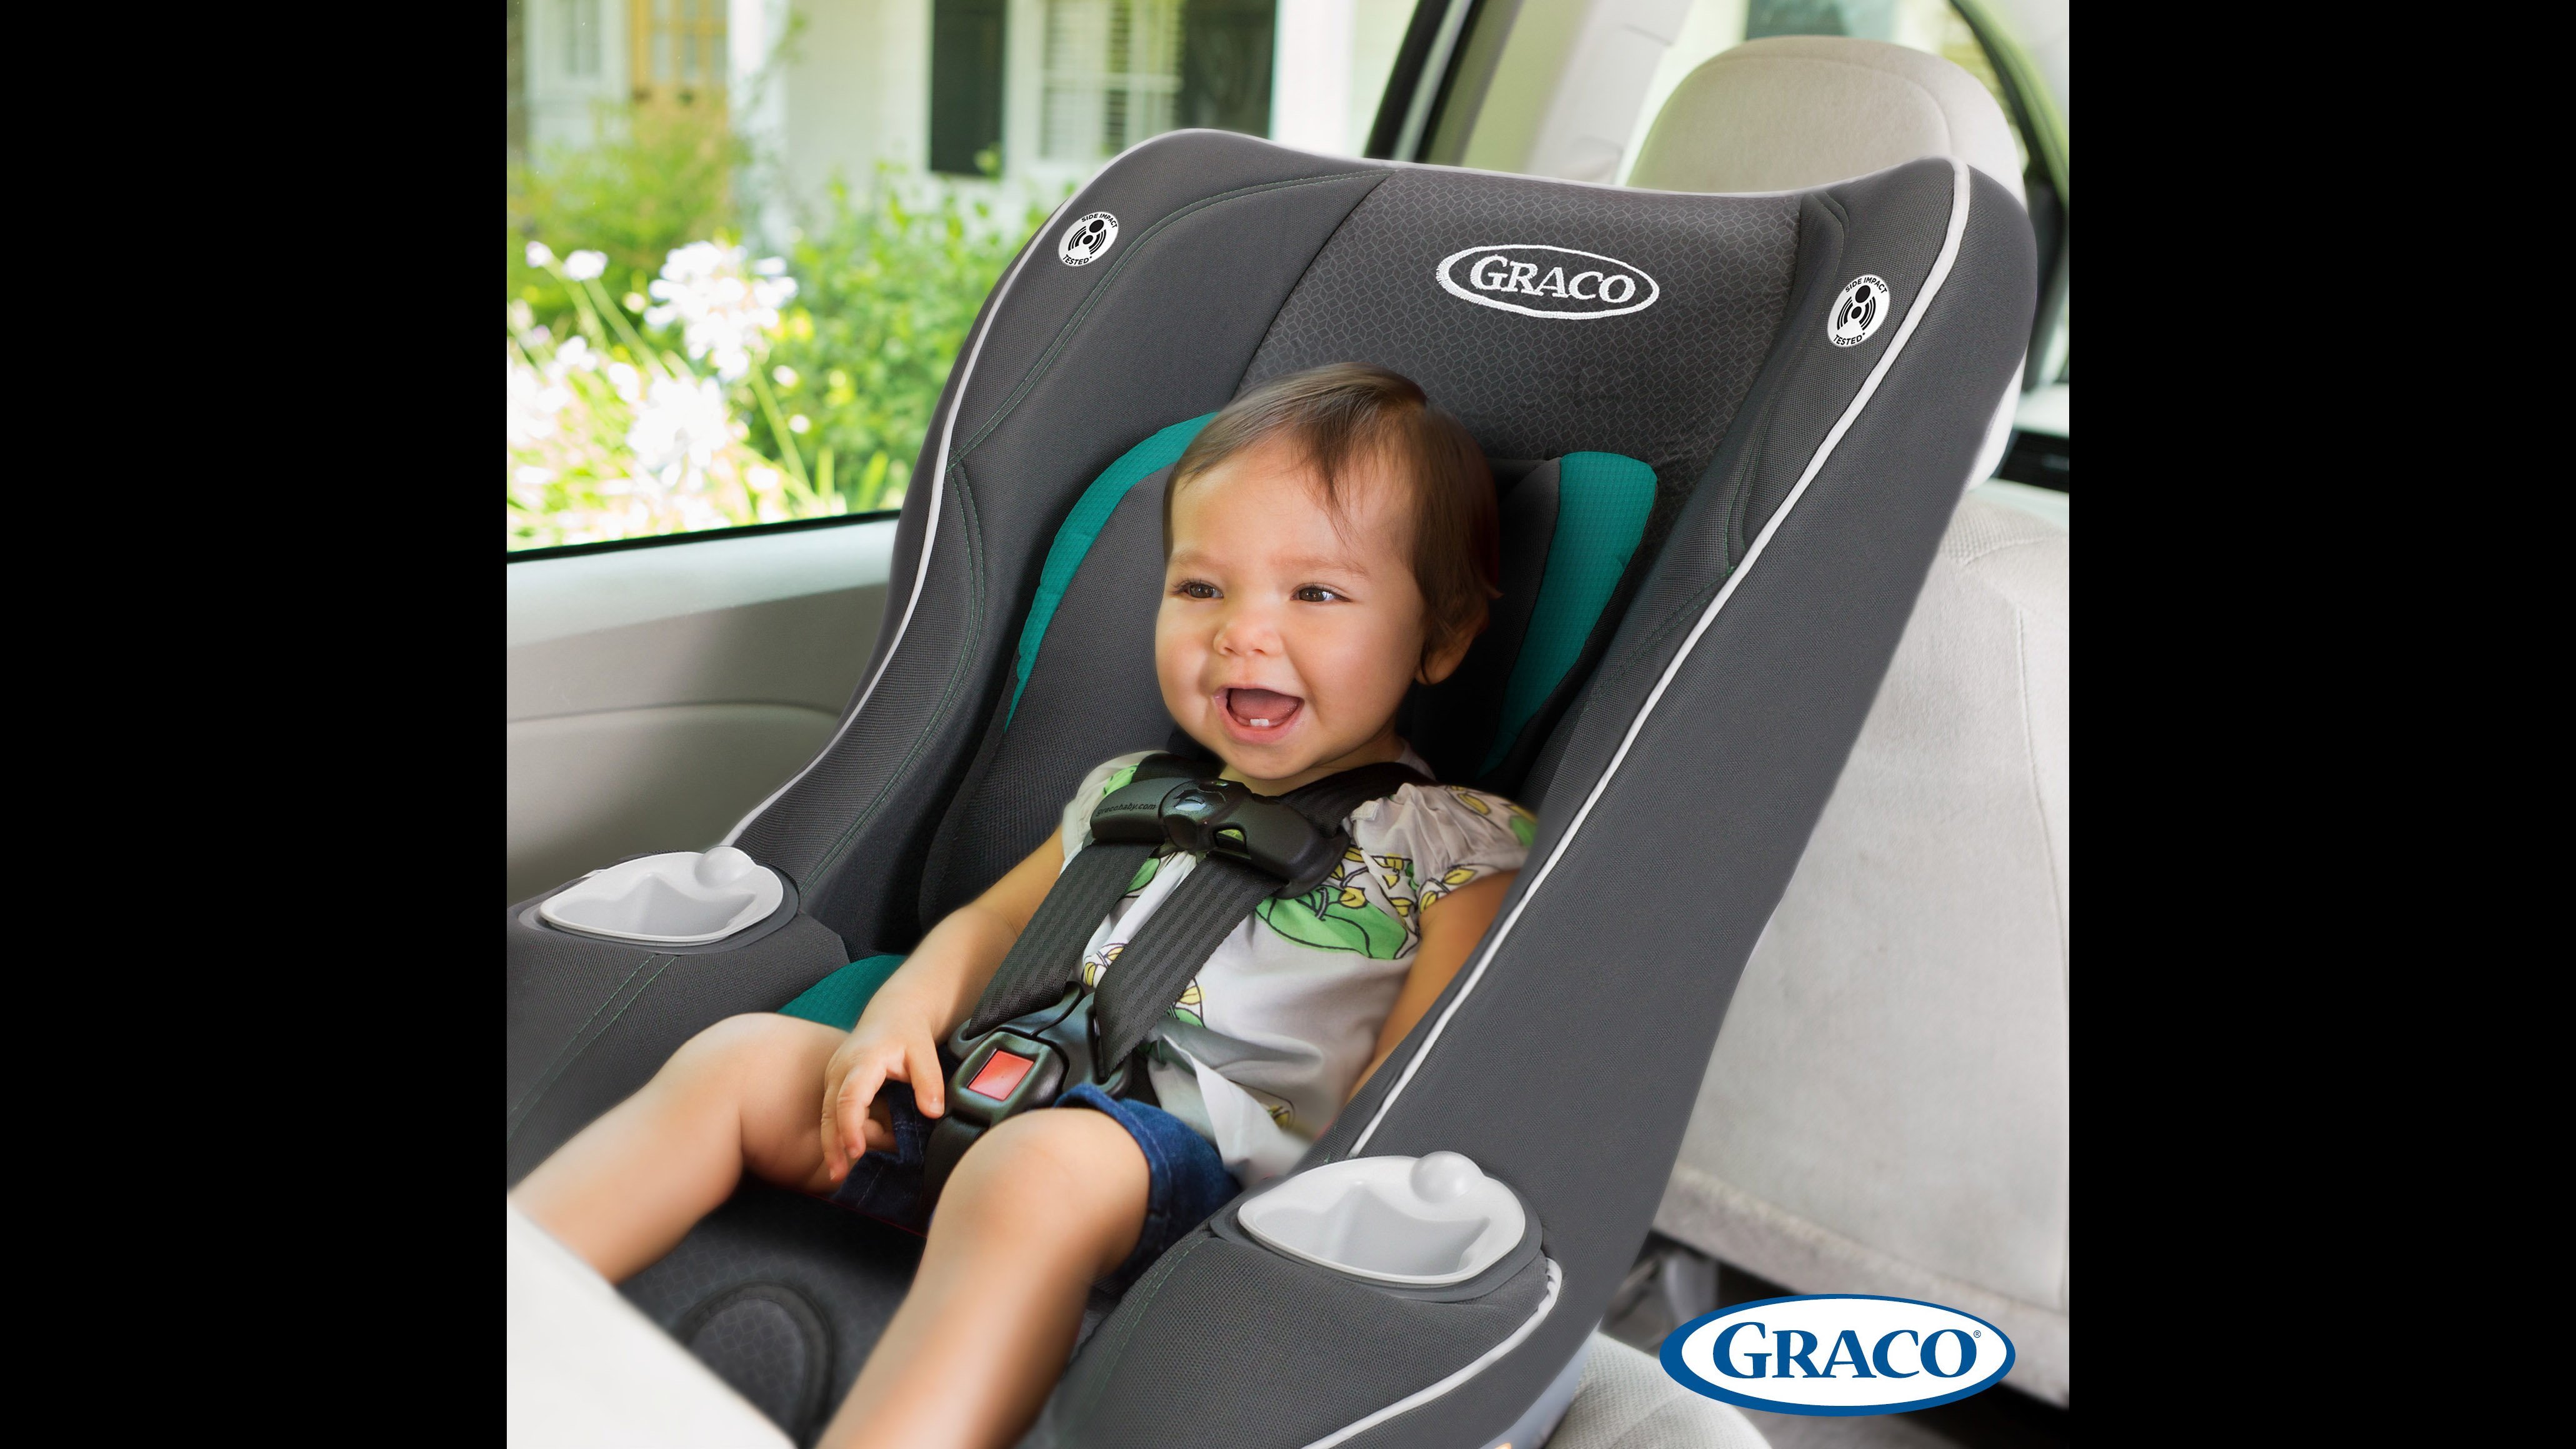 More than 25,000 Graco My Ride 65 car seats have been recalled.